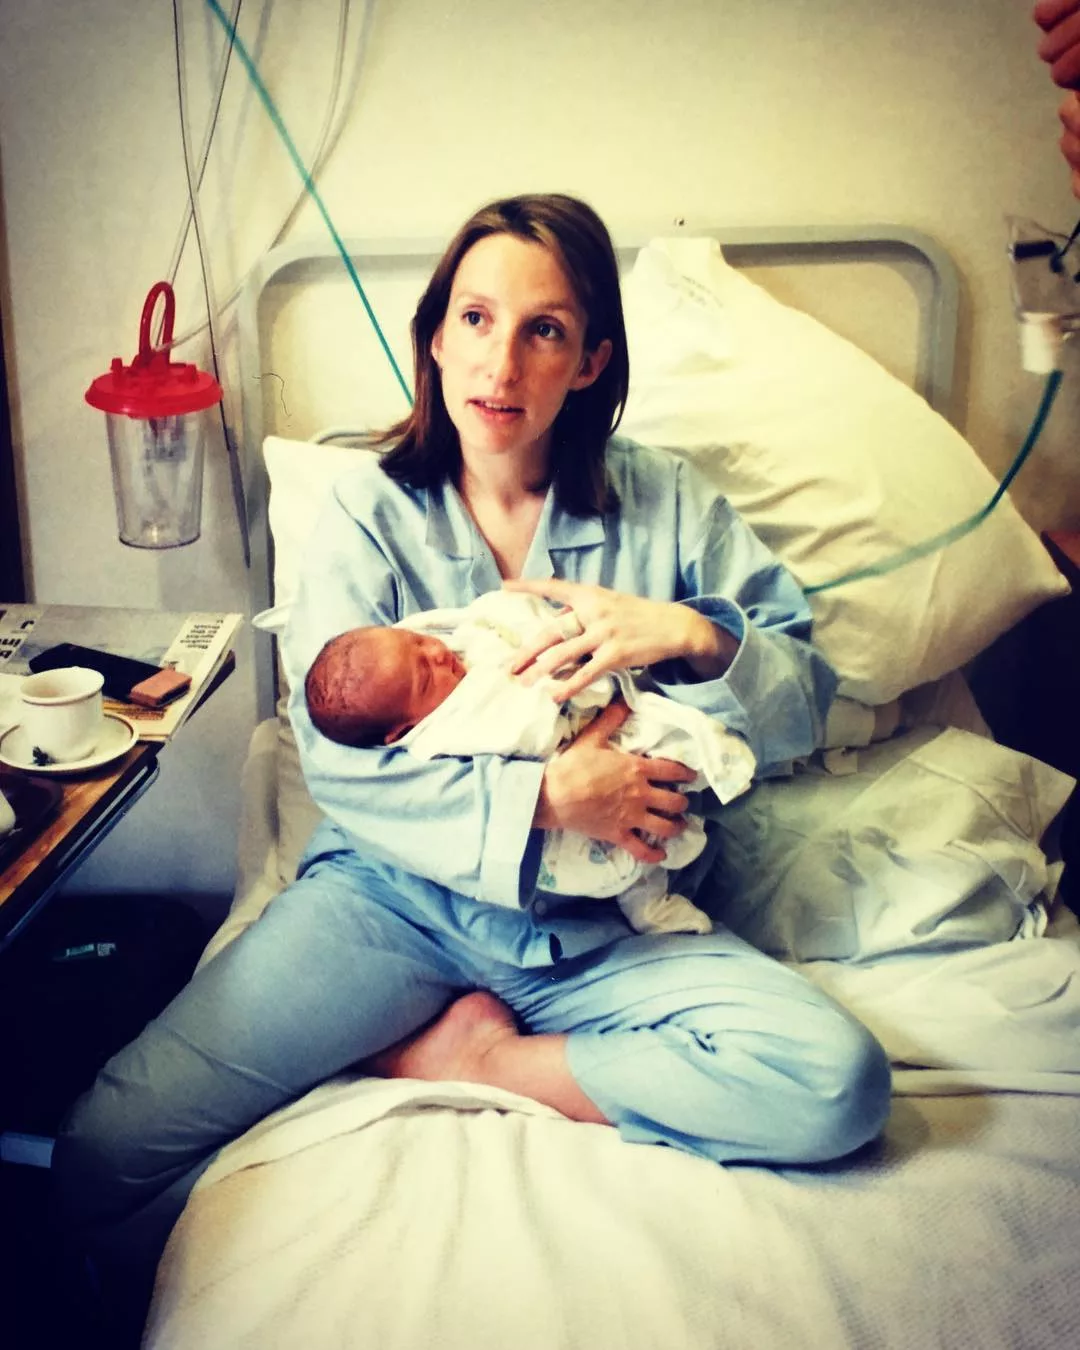 Sam Taylor Johnson with her daughter after giving her birth.